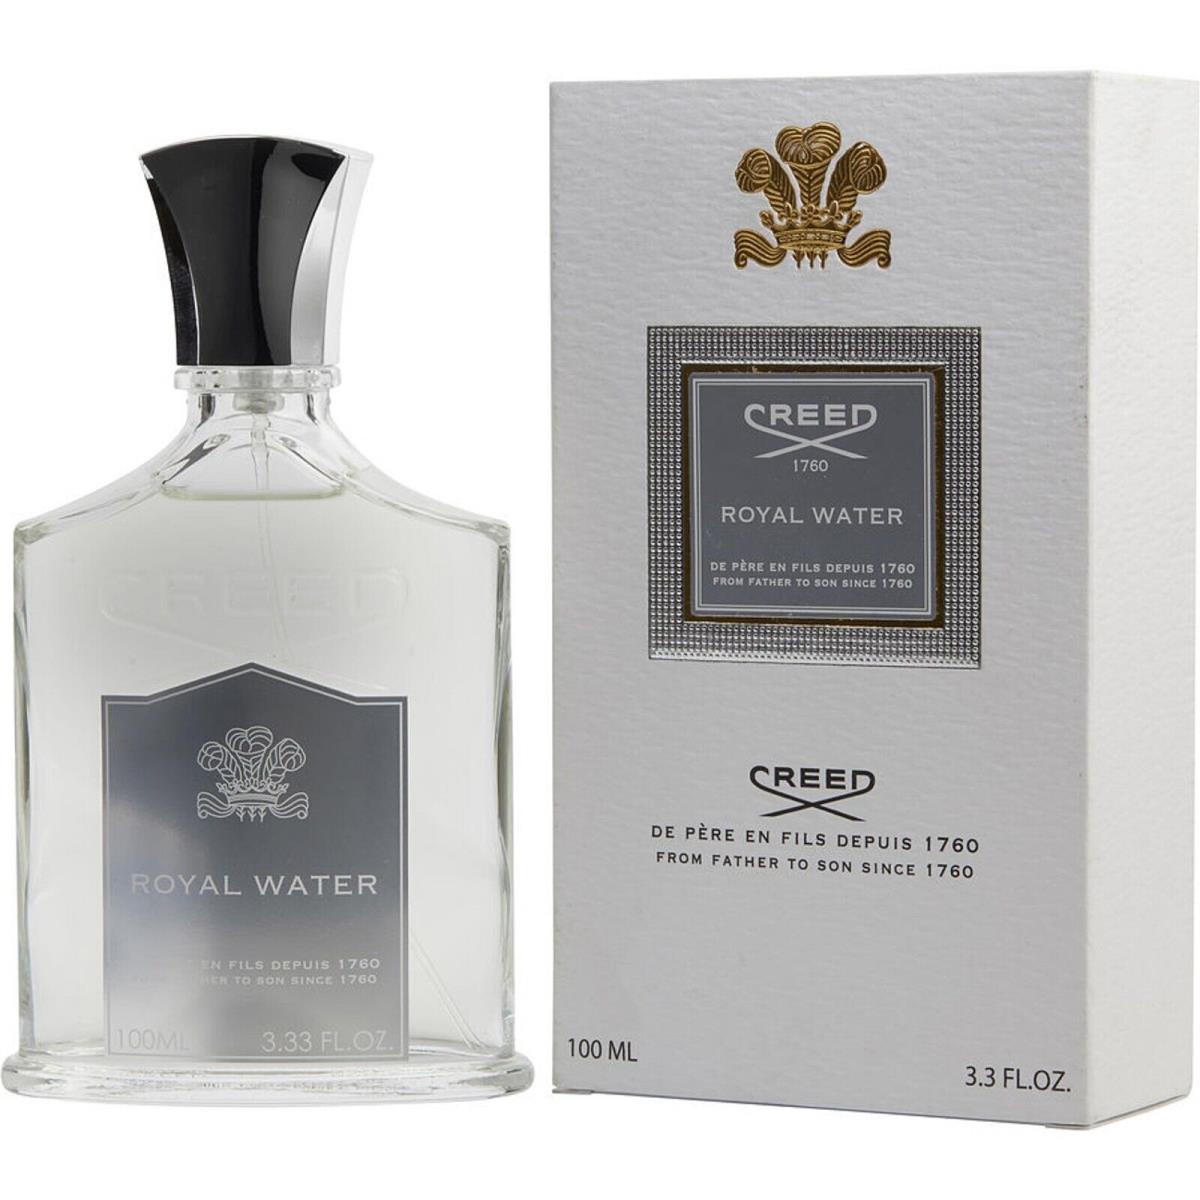 Creed Royal Water by Creed 3.3 oz / 100 ml Perfume Cologne For Men Women Seald